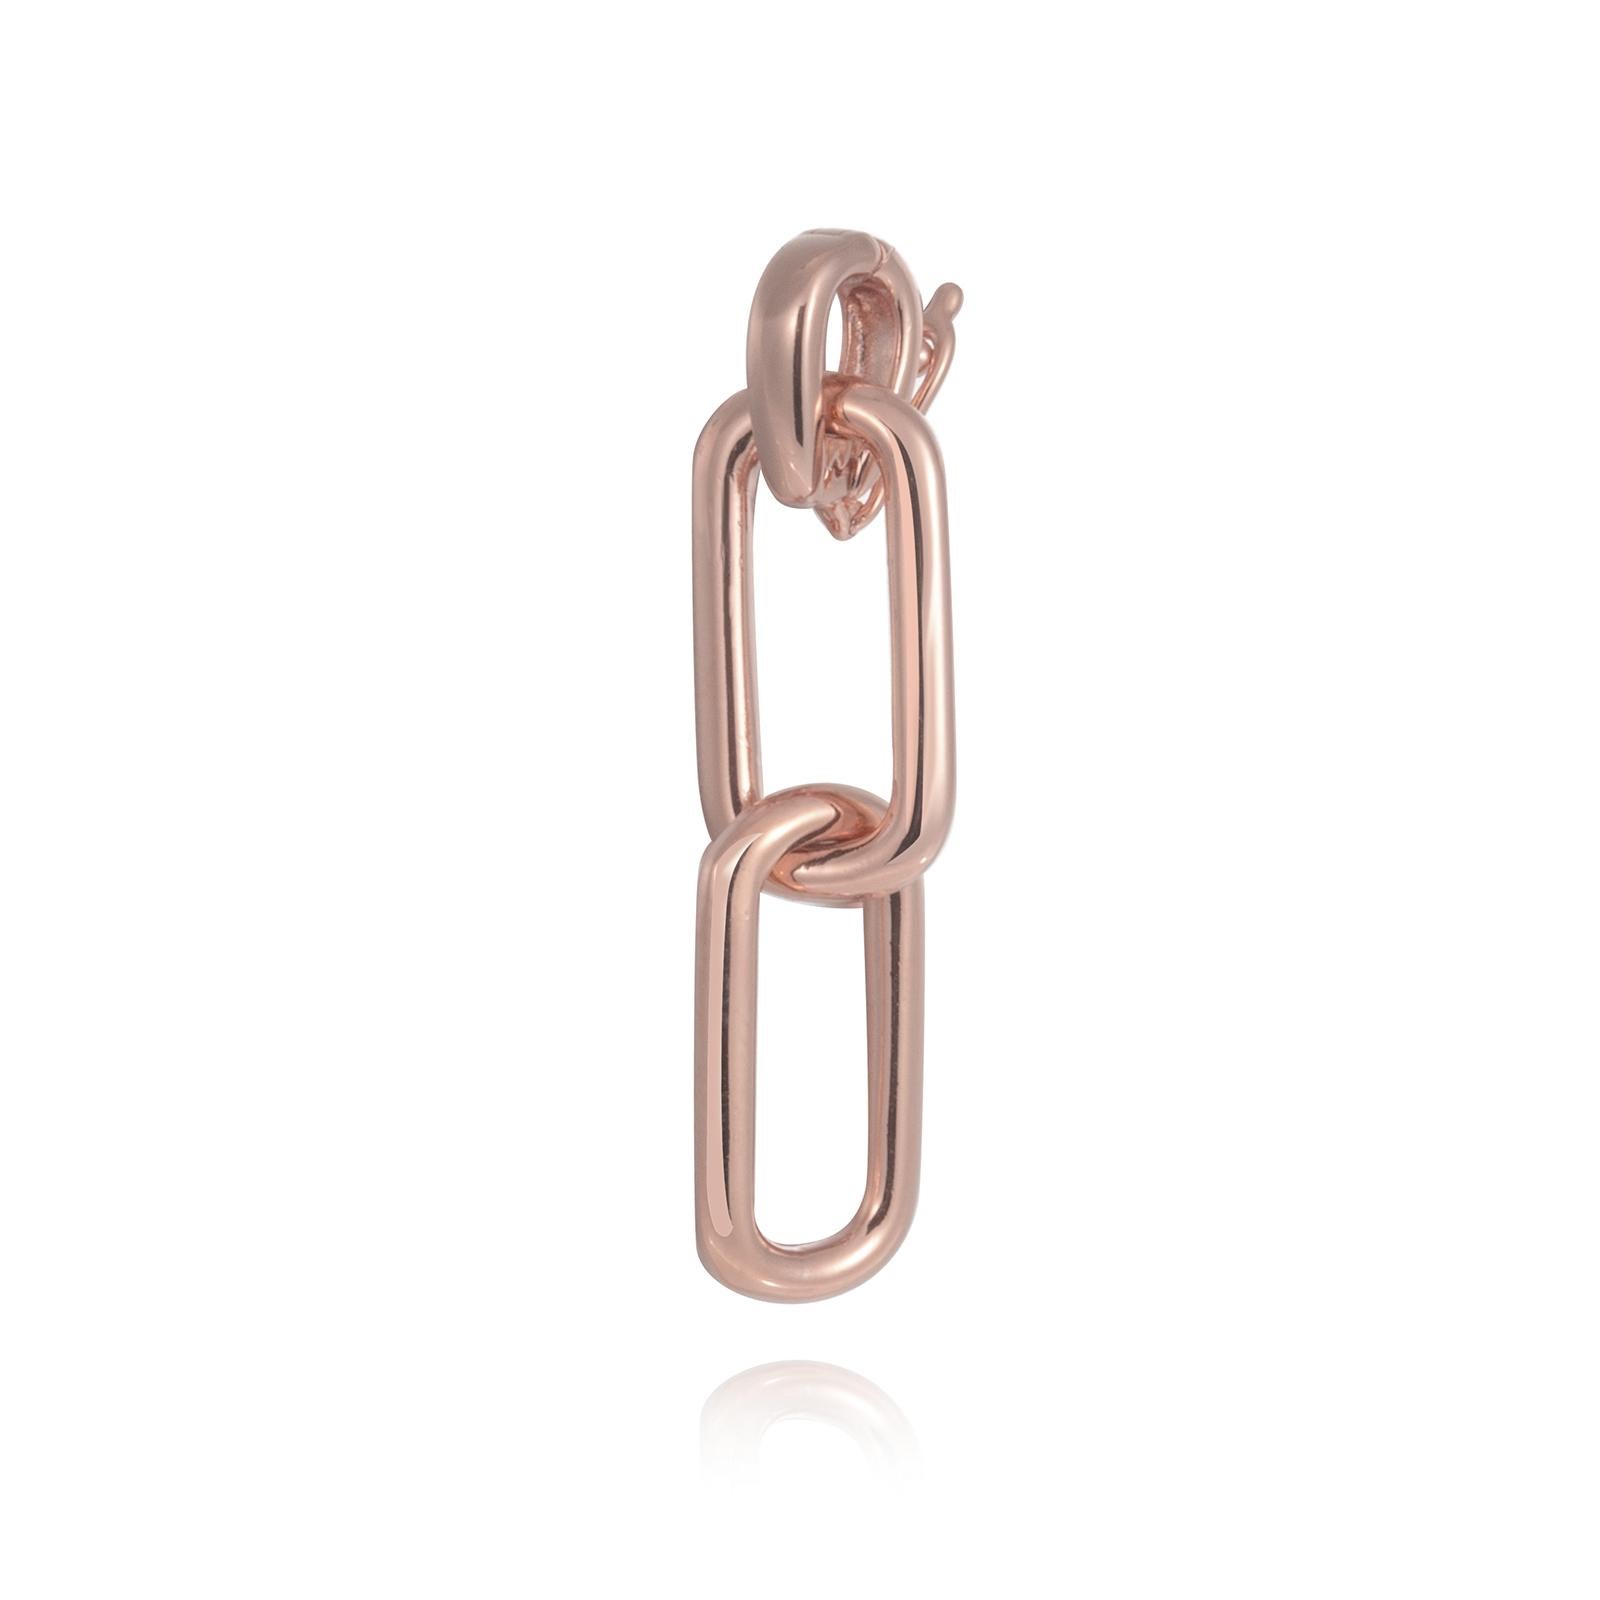 This paperclip pendant is the perfect accessory to complement your stacked chains.  .925 sterling silver base. Also available in sterling silver or 24k rose gold vermeil.   

· 15 mm oval paperclip links
· .925 sterling silver detachable bail to